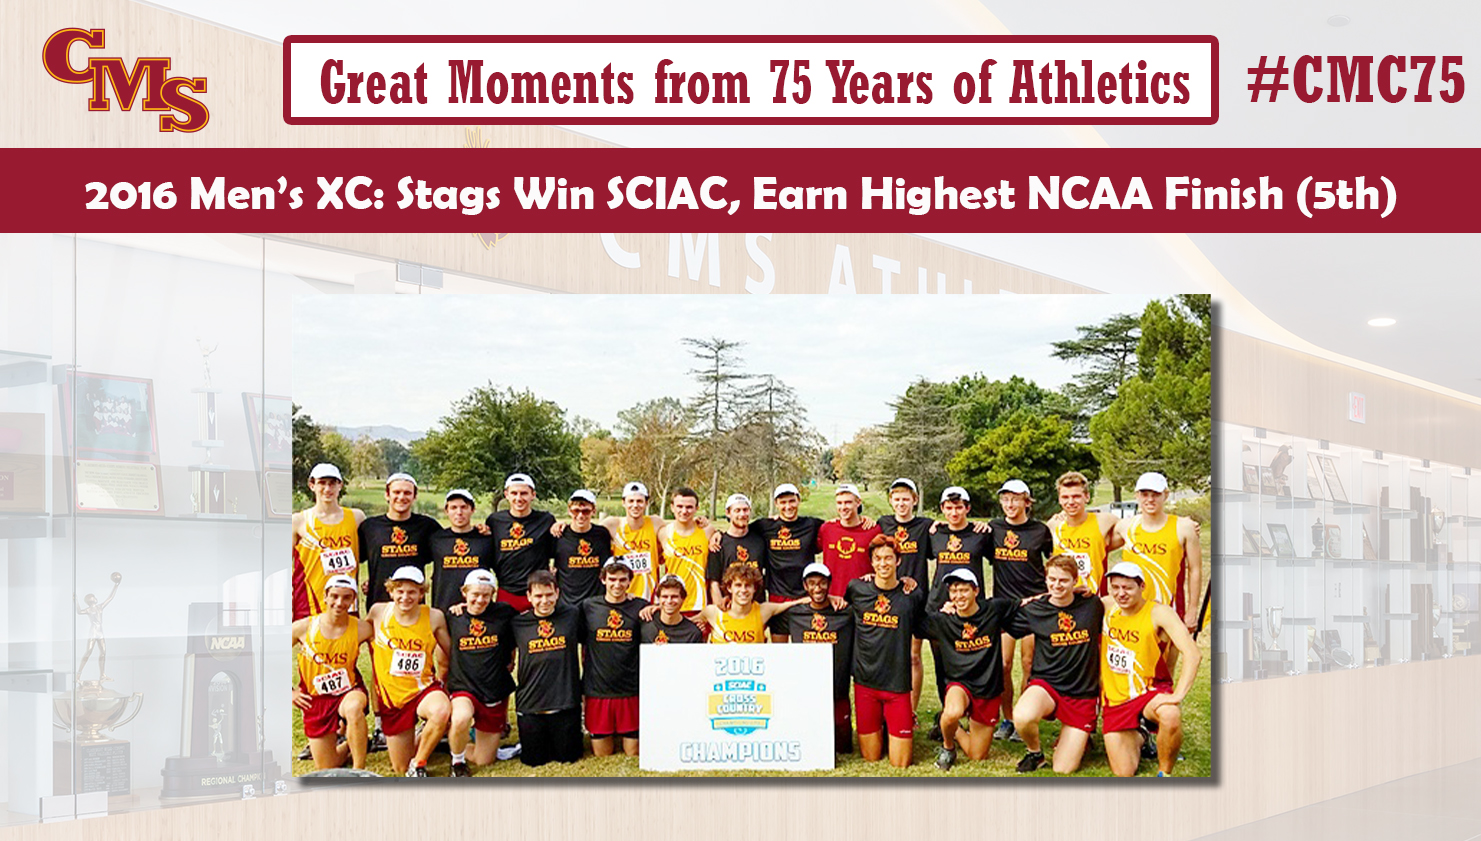 CMS celebrating the SCIAC title. Words over the photo read: Great Moments from 75 Years of Athletics. 2016 Men's XC: Stags win SCIAC, Earn Highest NCAA Finish (5th)